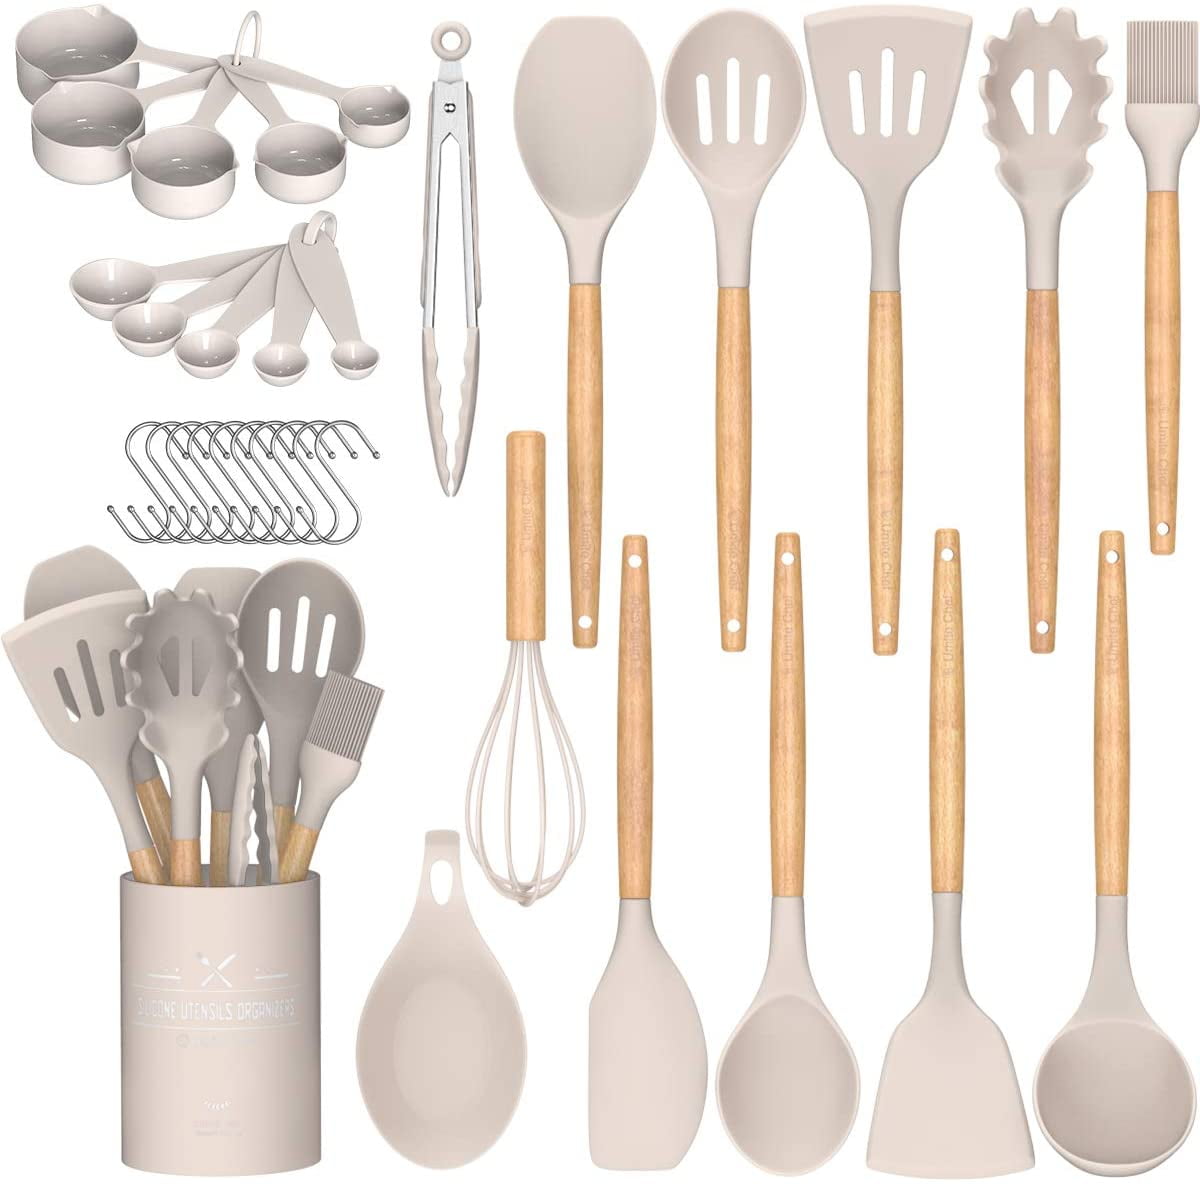 Umite Chef 36pcs Silicone Kitchen Cooking Utensils with Holder, Heat  Resistant Cooking Utensils Sets…See more Umite Chef 36pcs Silicone Kitchen